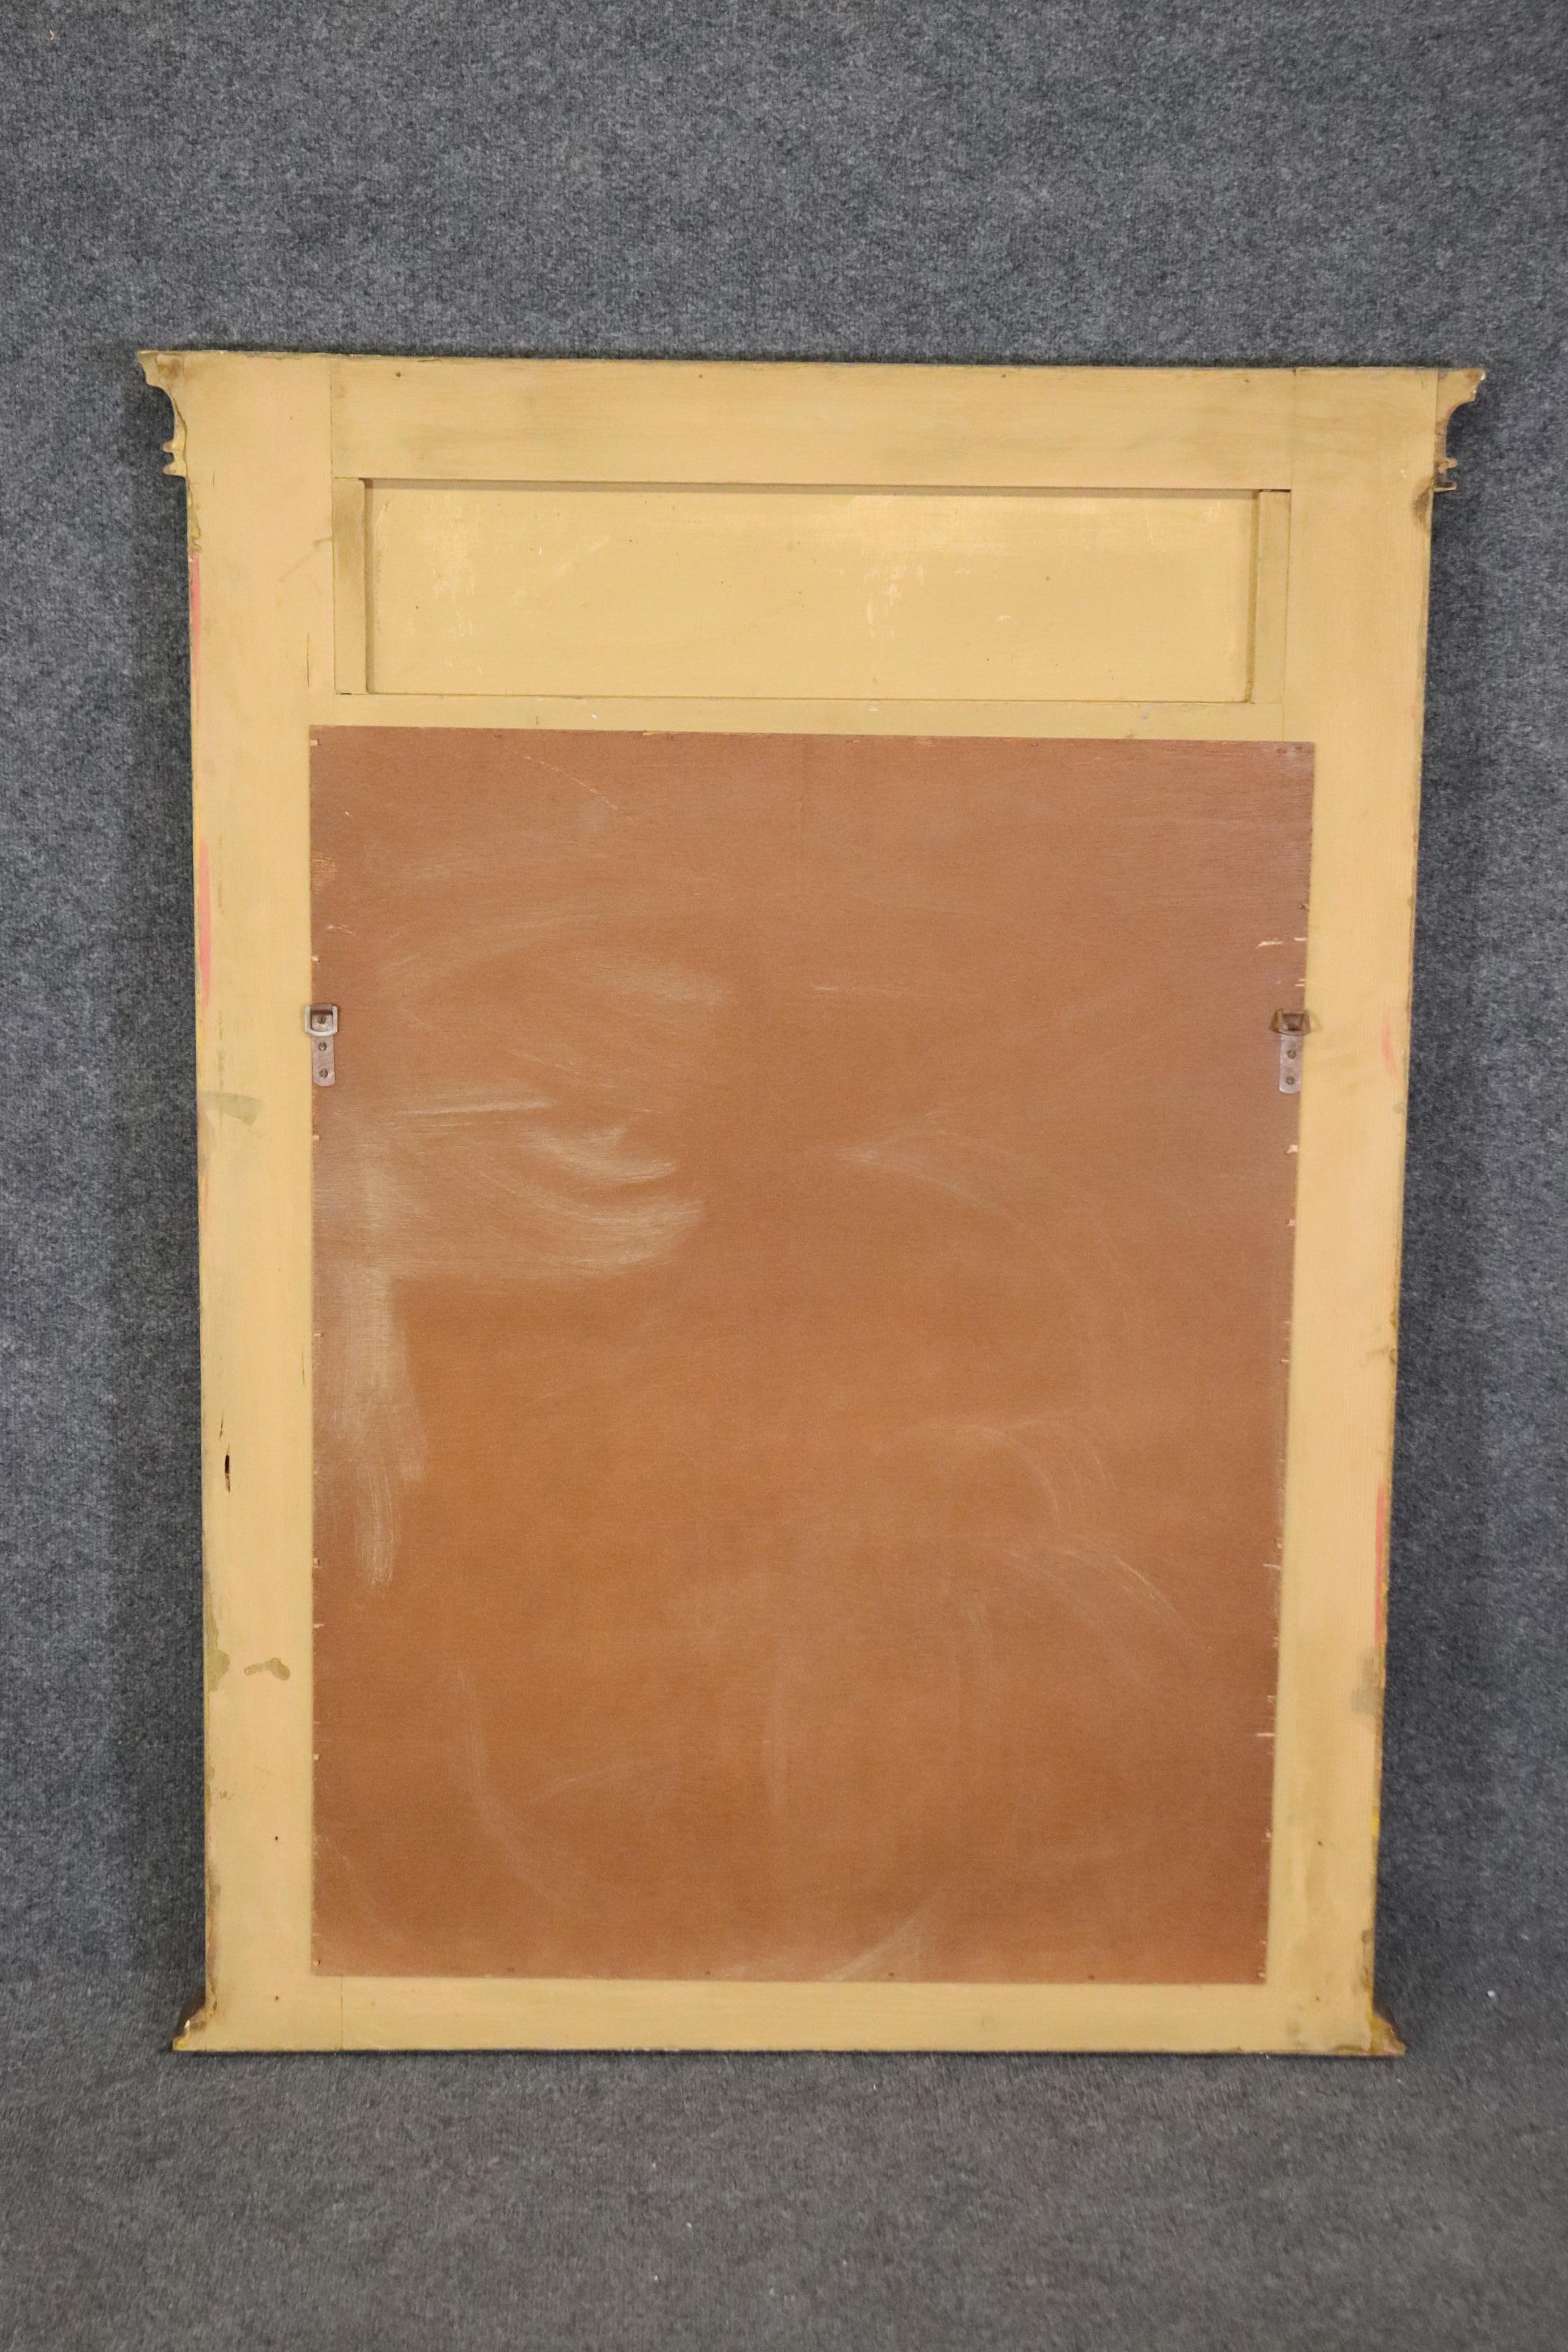 Dimensions- H: 52 1/4in W: 39 3/4in D: 3in

This vintage French distressed trumeau wall hanging mirror is an exceptional example of mid 20th century decor!  If you look at the photos provided, you can see the intentionally distressed finish and